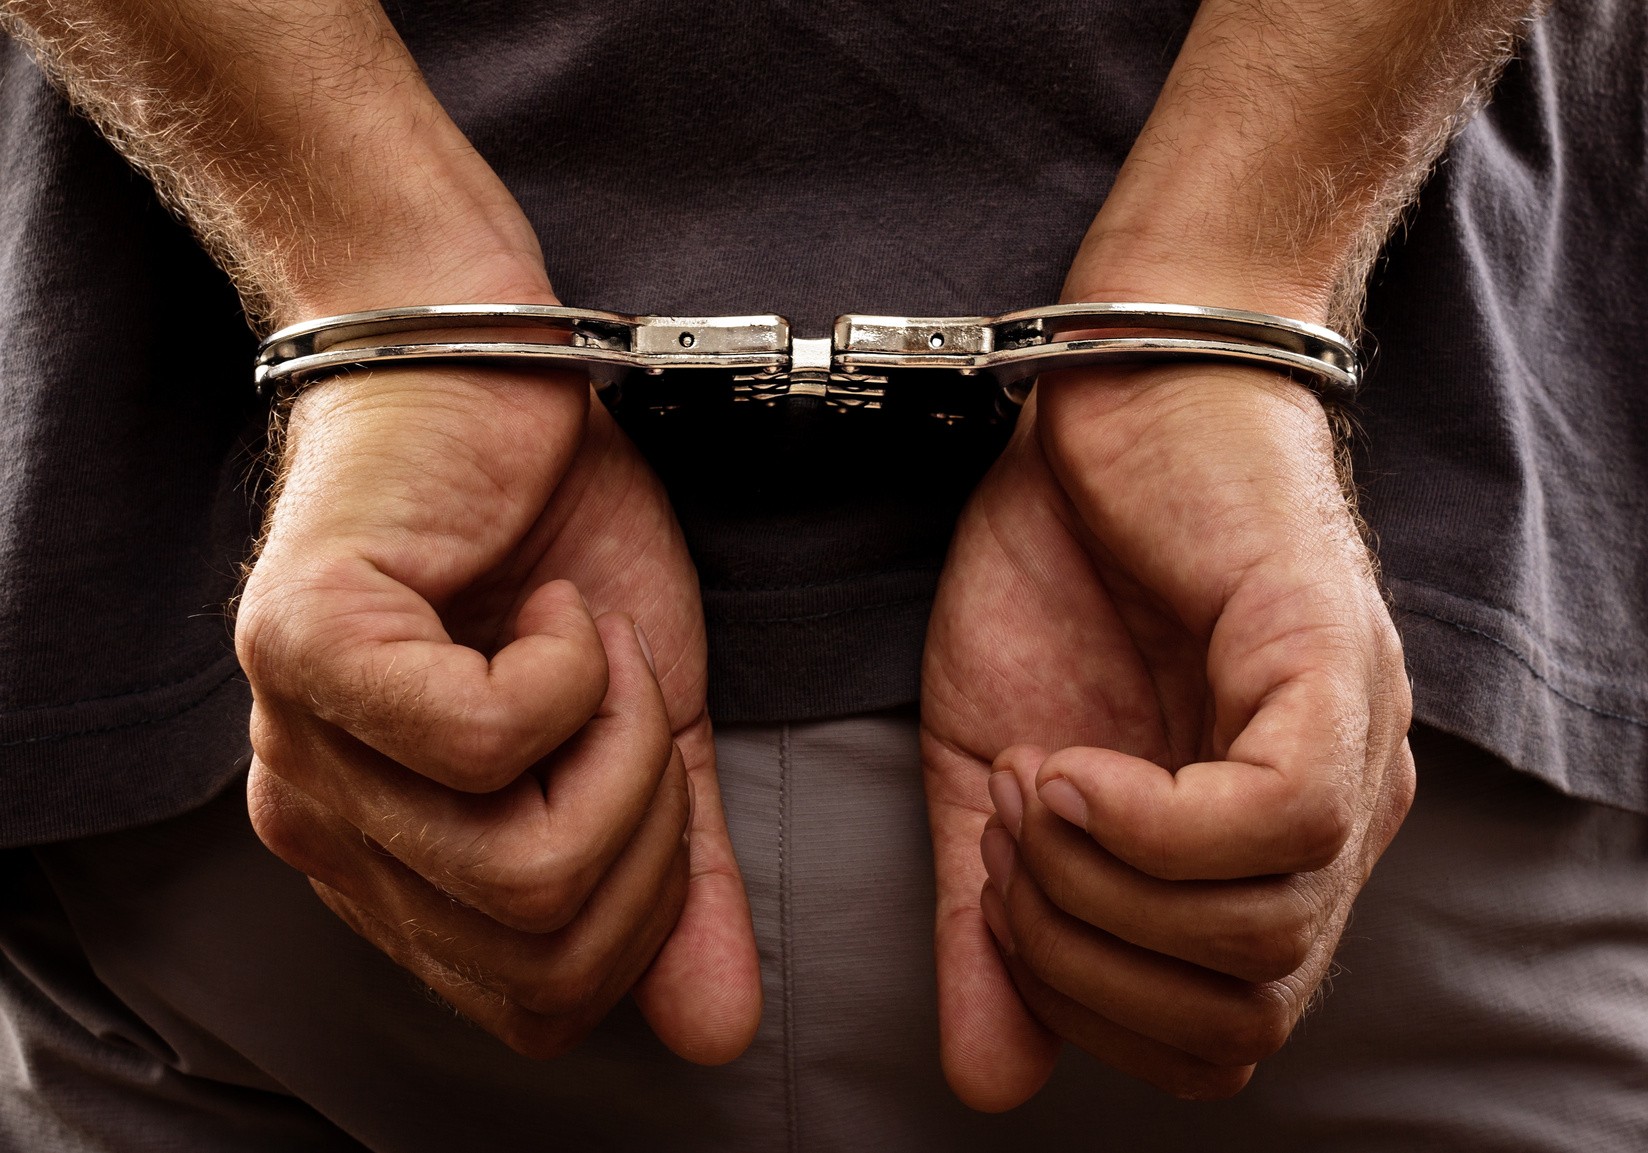 Can You Answer Questions That Everyone Should Know? Quiz criminal in handcuffs